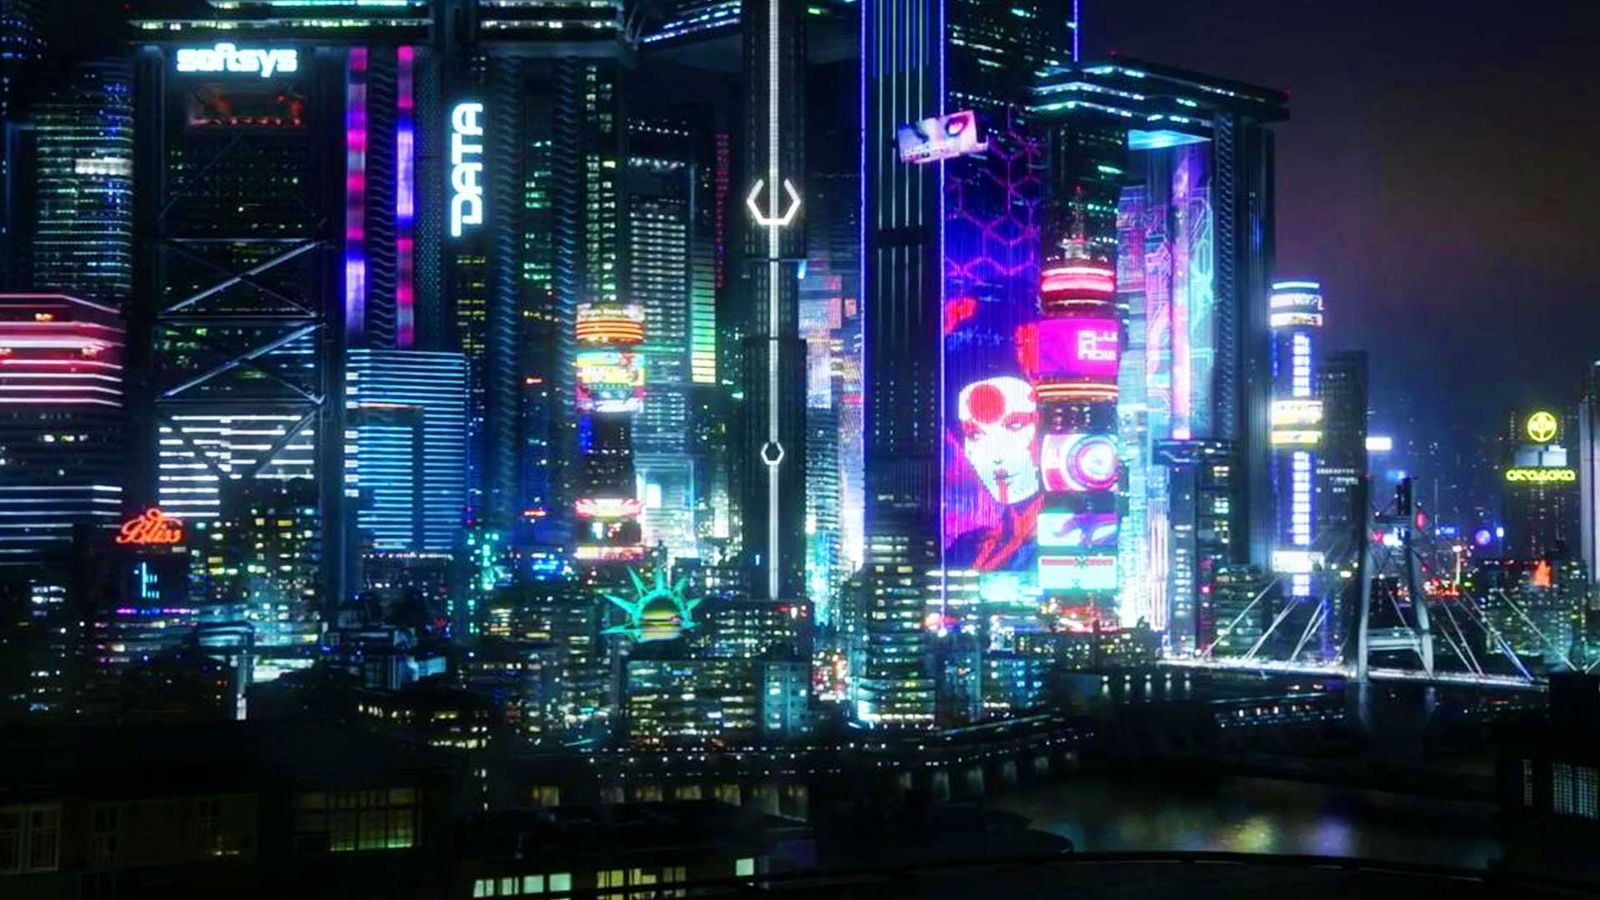 An image of Night City from Cyberpunk 2077, in at number 7 in the Top 10 worst video game cities to live in.